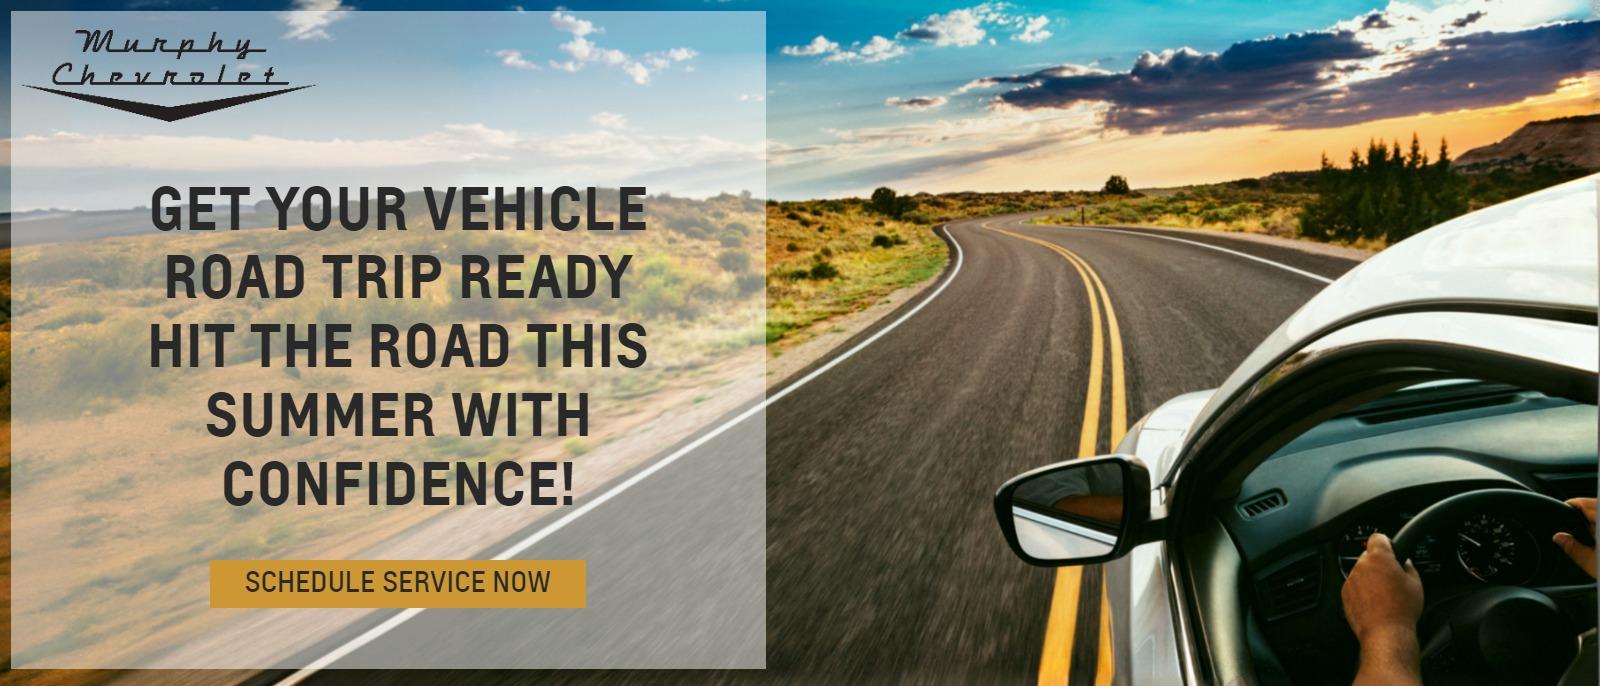 Get Your Vehicle Road Trip Read
Hit the road this summer with confidence!